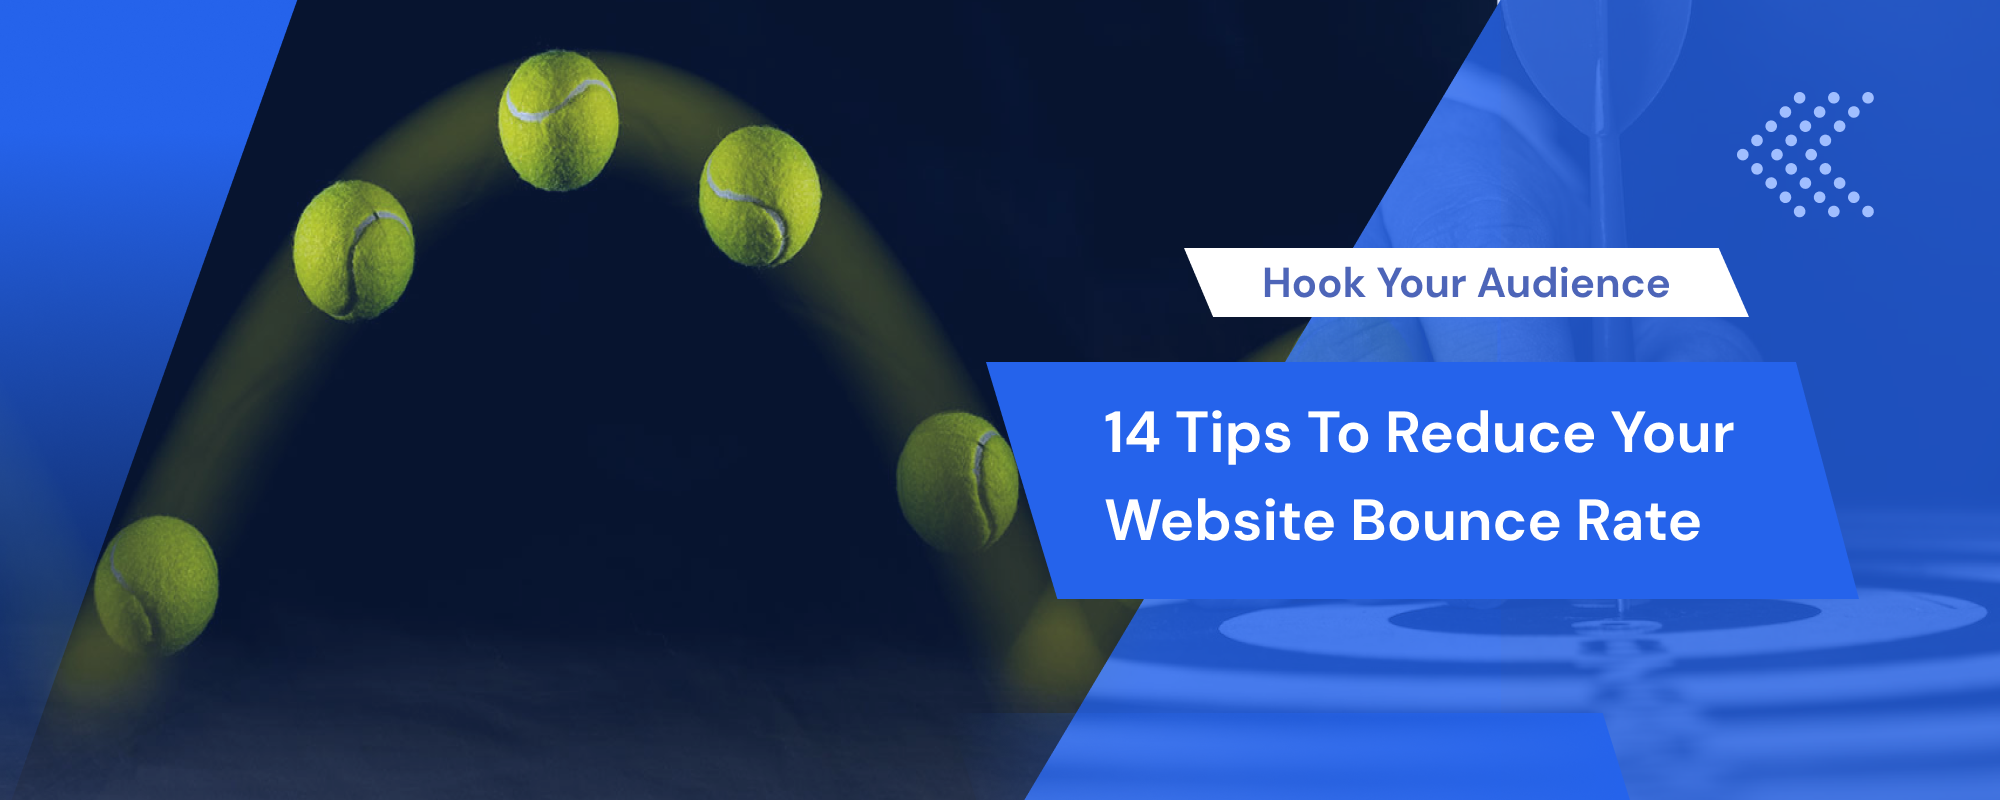 Keep Your Audience Hooked: Tips for Minimizing Bounce Rate on Your Website